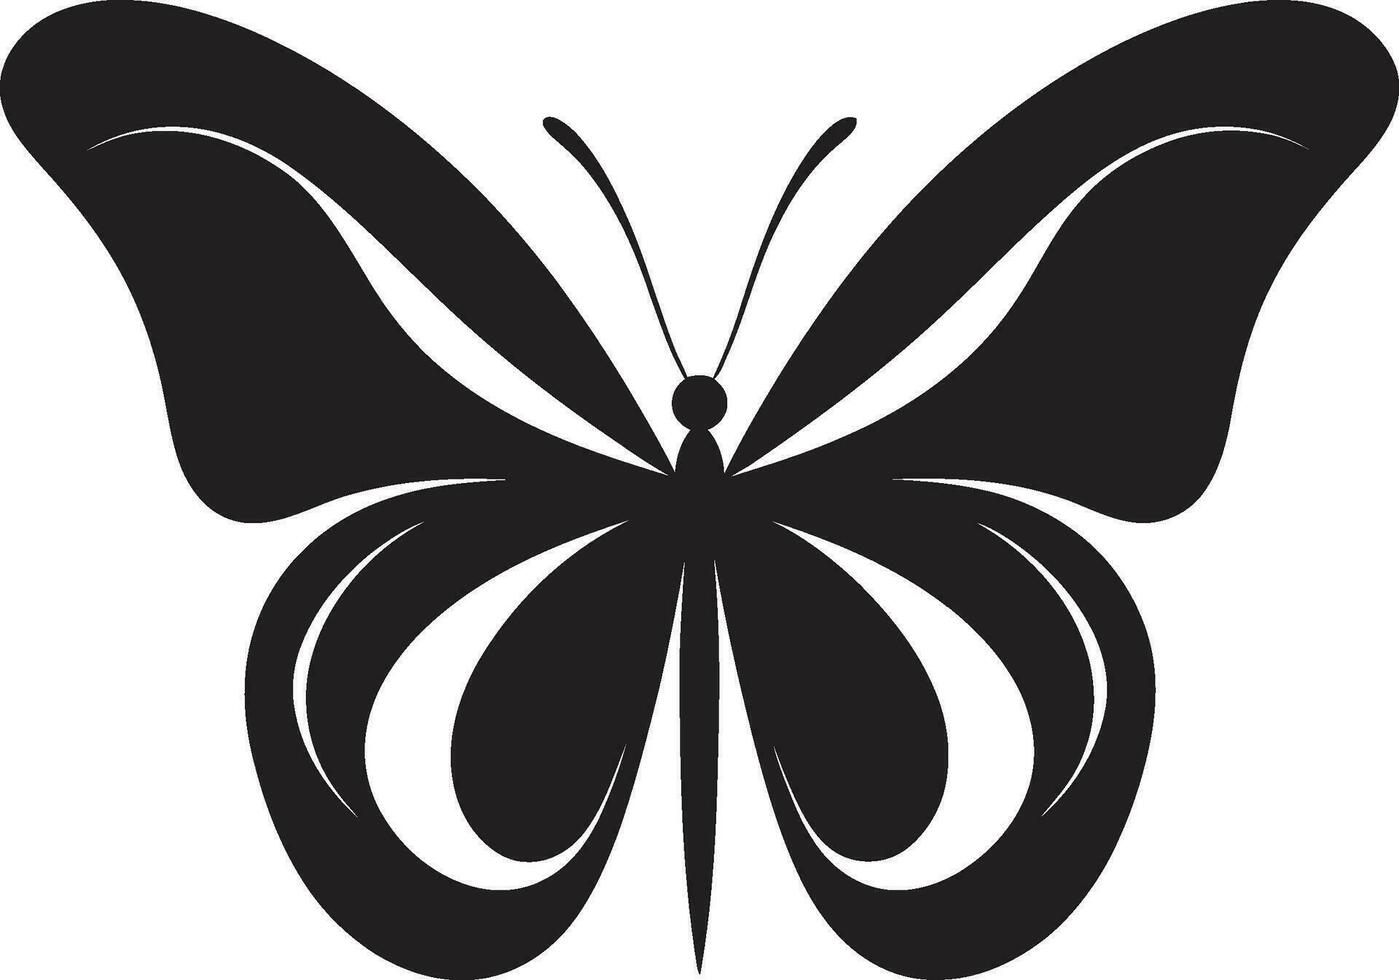 Majestic Wings Black Vector Logo Design Sculpted Freedom Butterfly Icon in Black